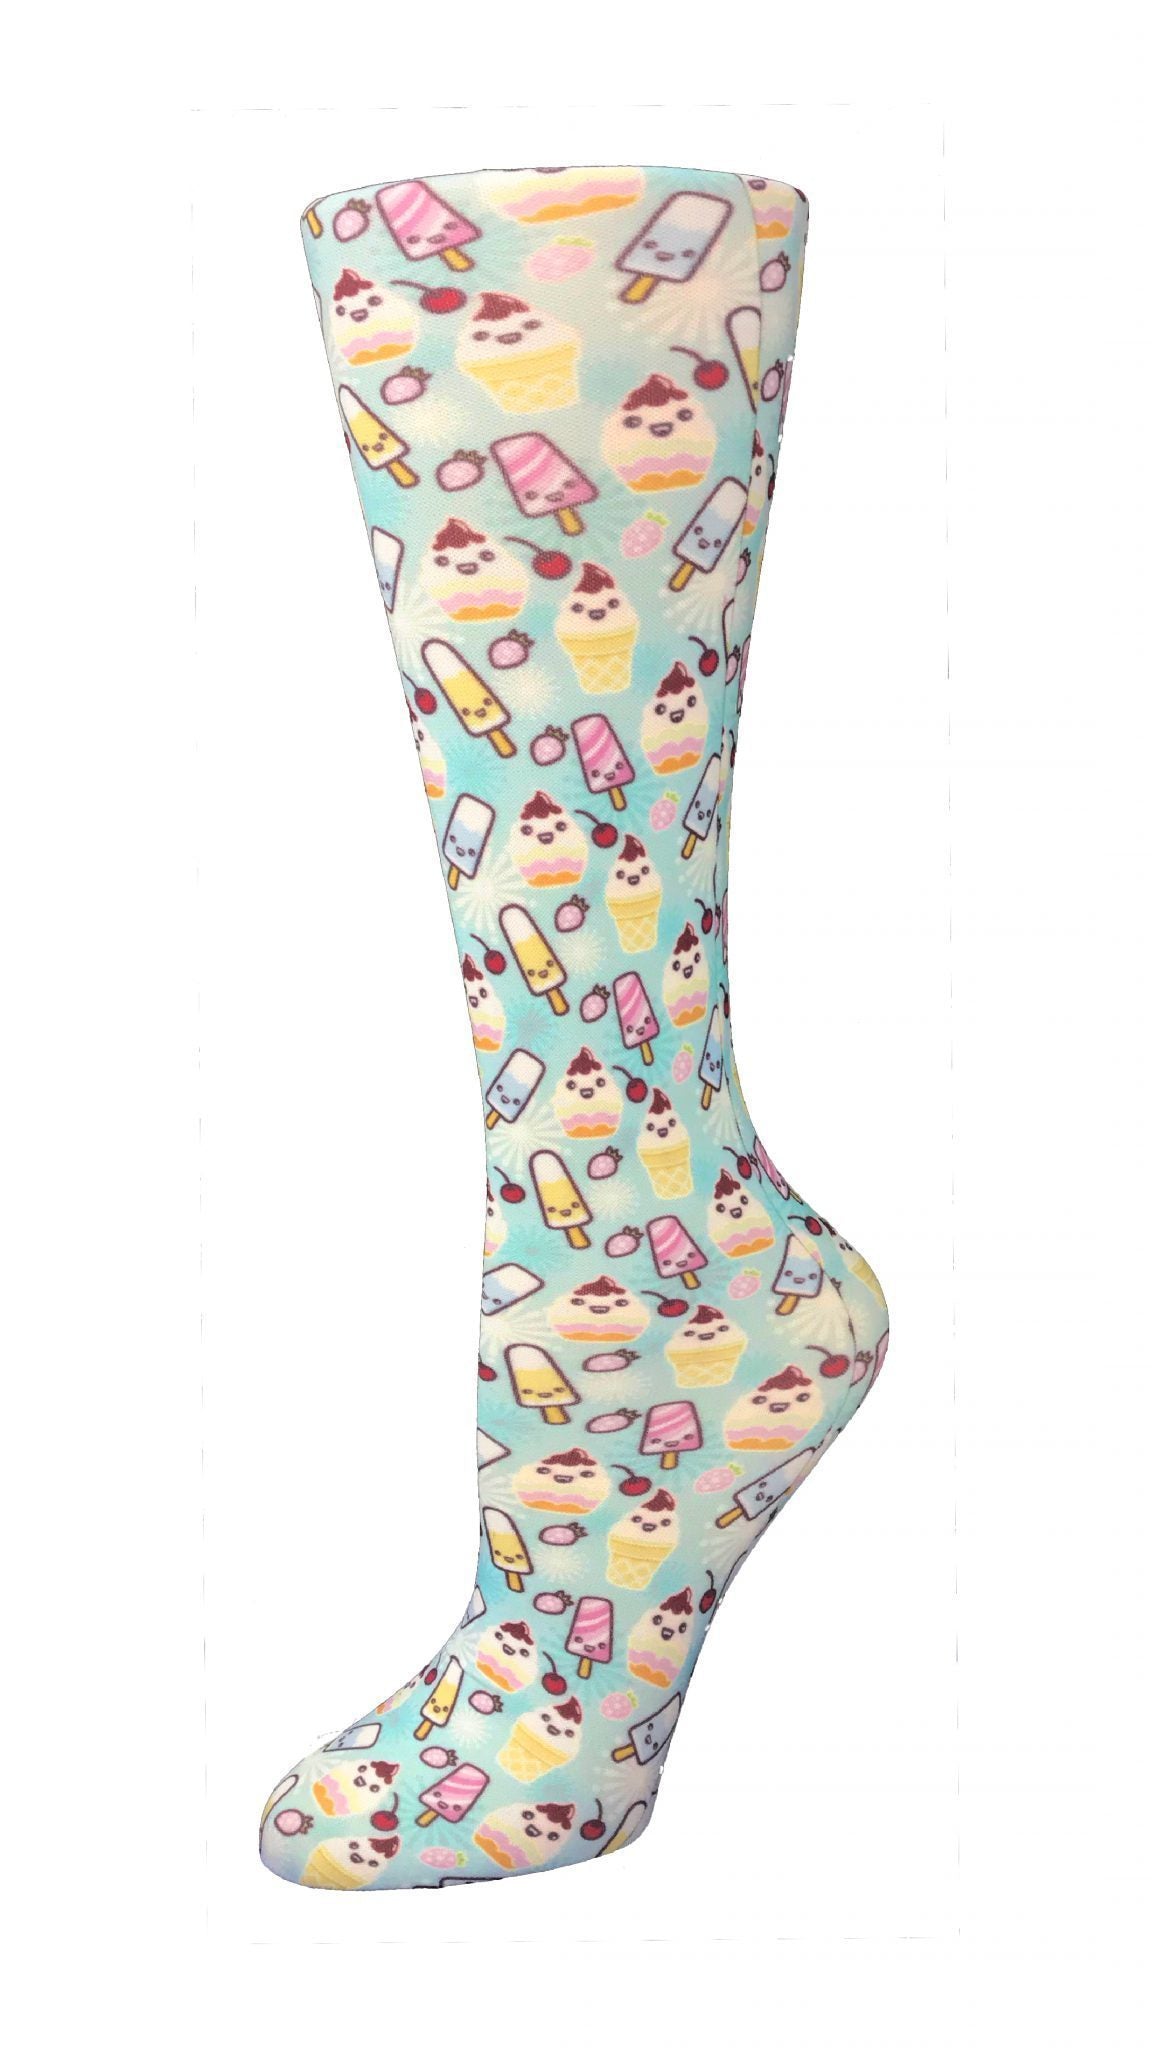 Cutieful Moderate Compression Socks 10-18 MMhg Wide Calf Knit Print Pattern Ice Cream Social at Parker's Clothing and Shoes.